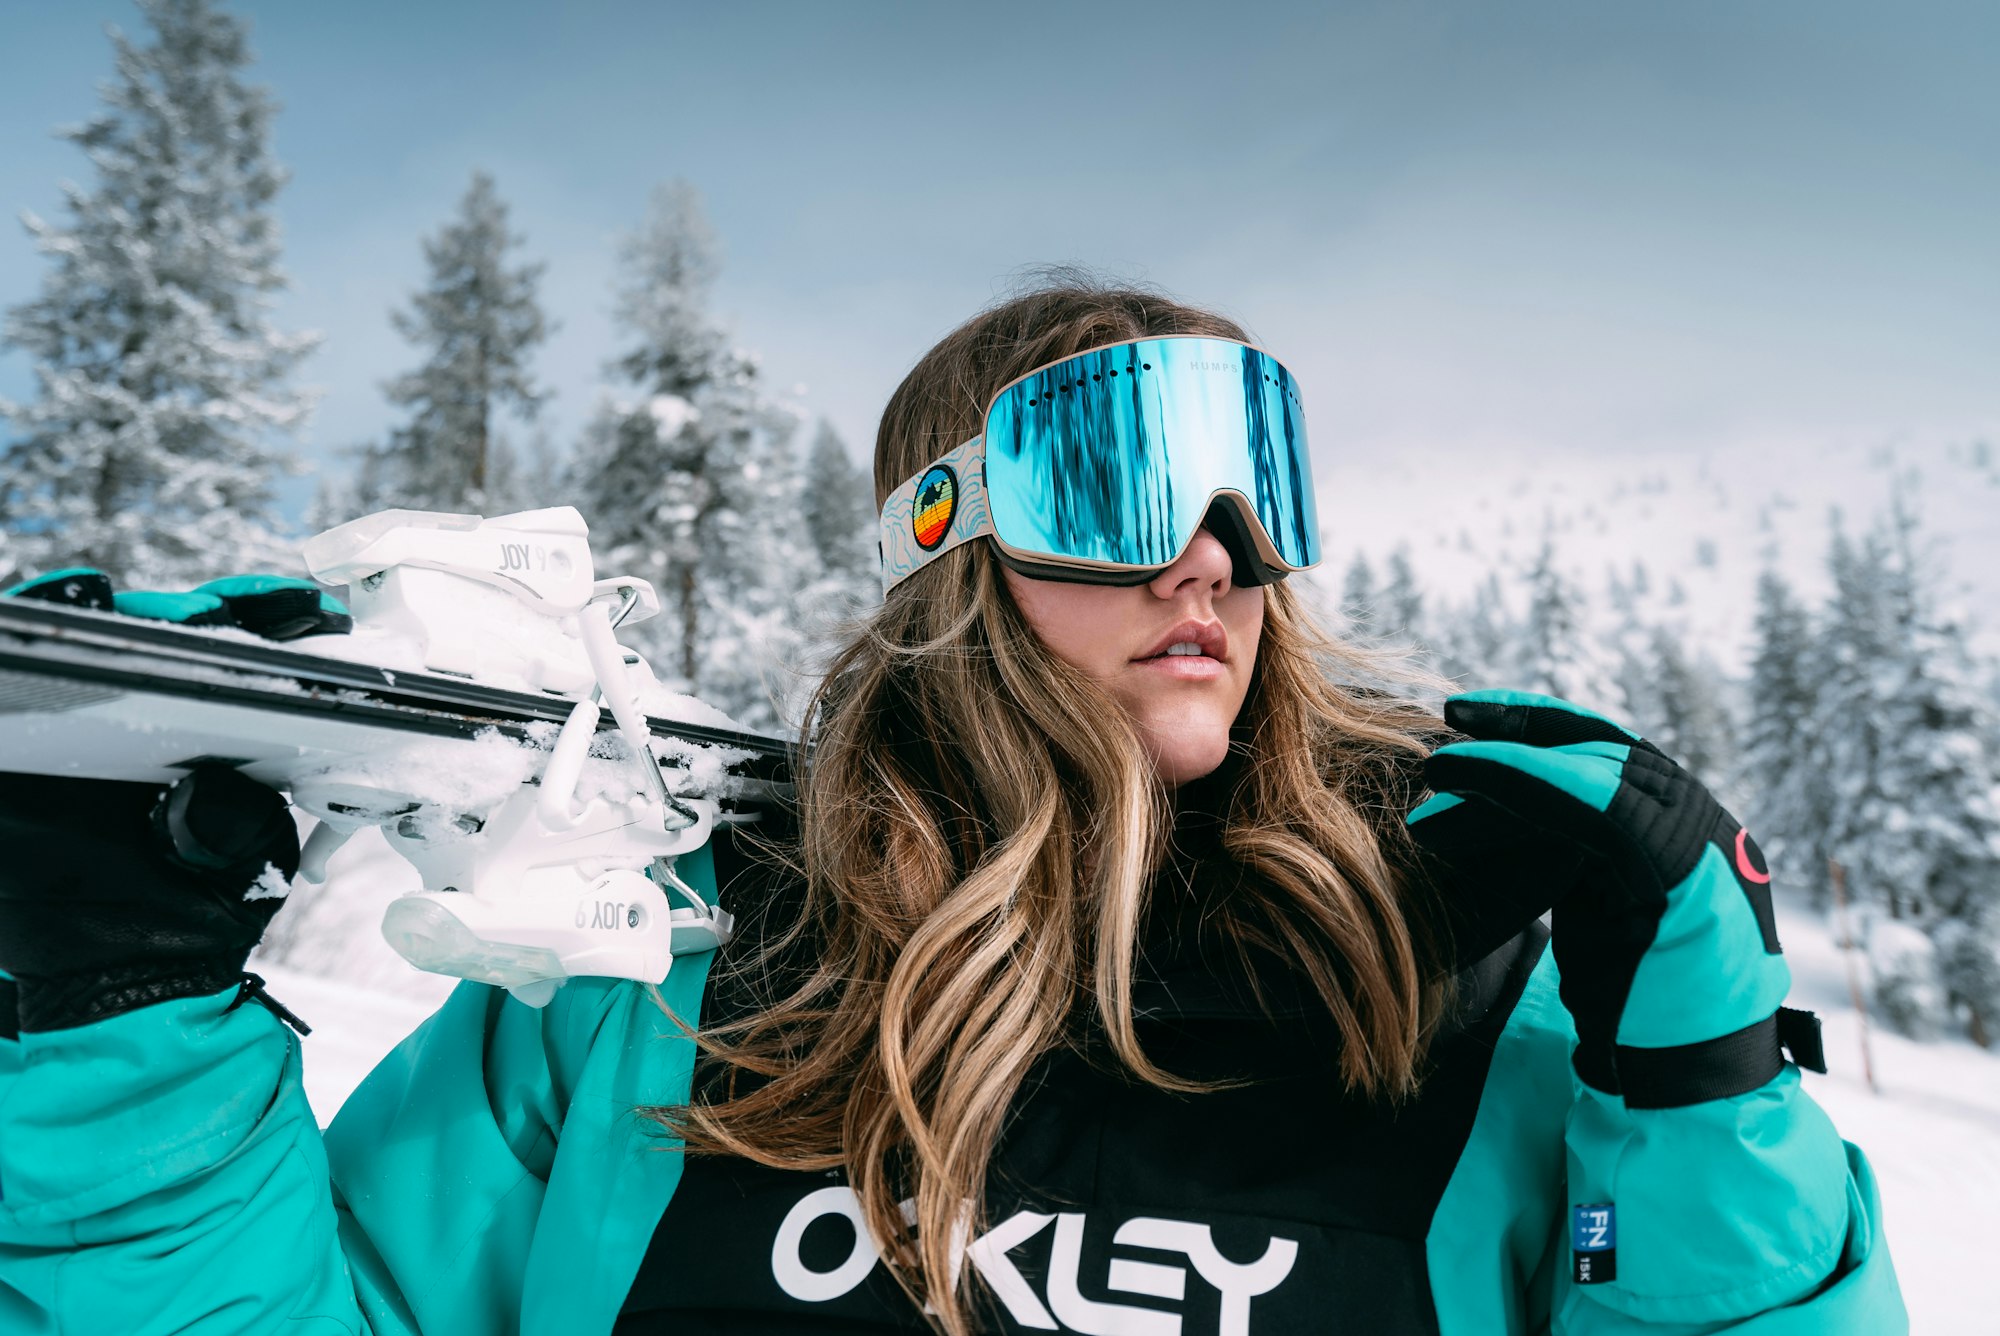 How to Buy Ski Goggles